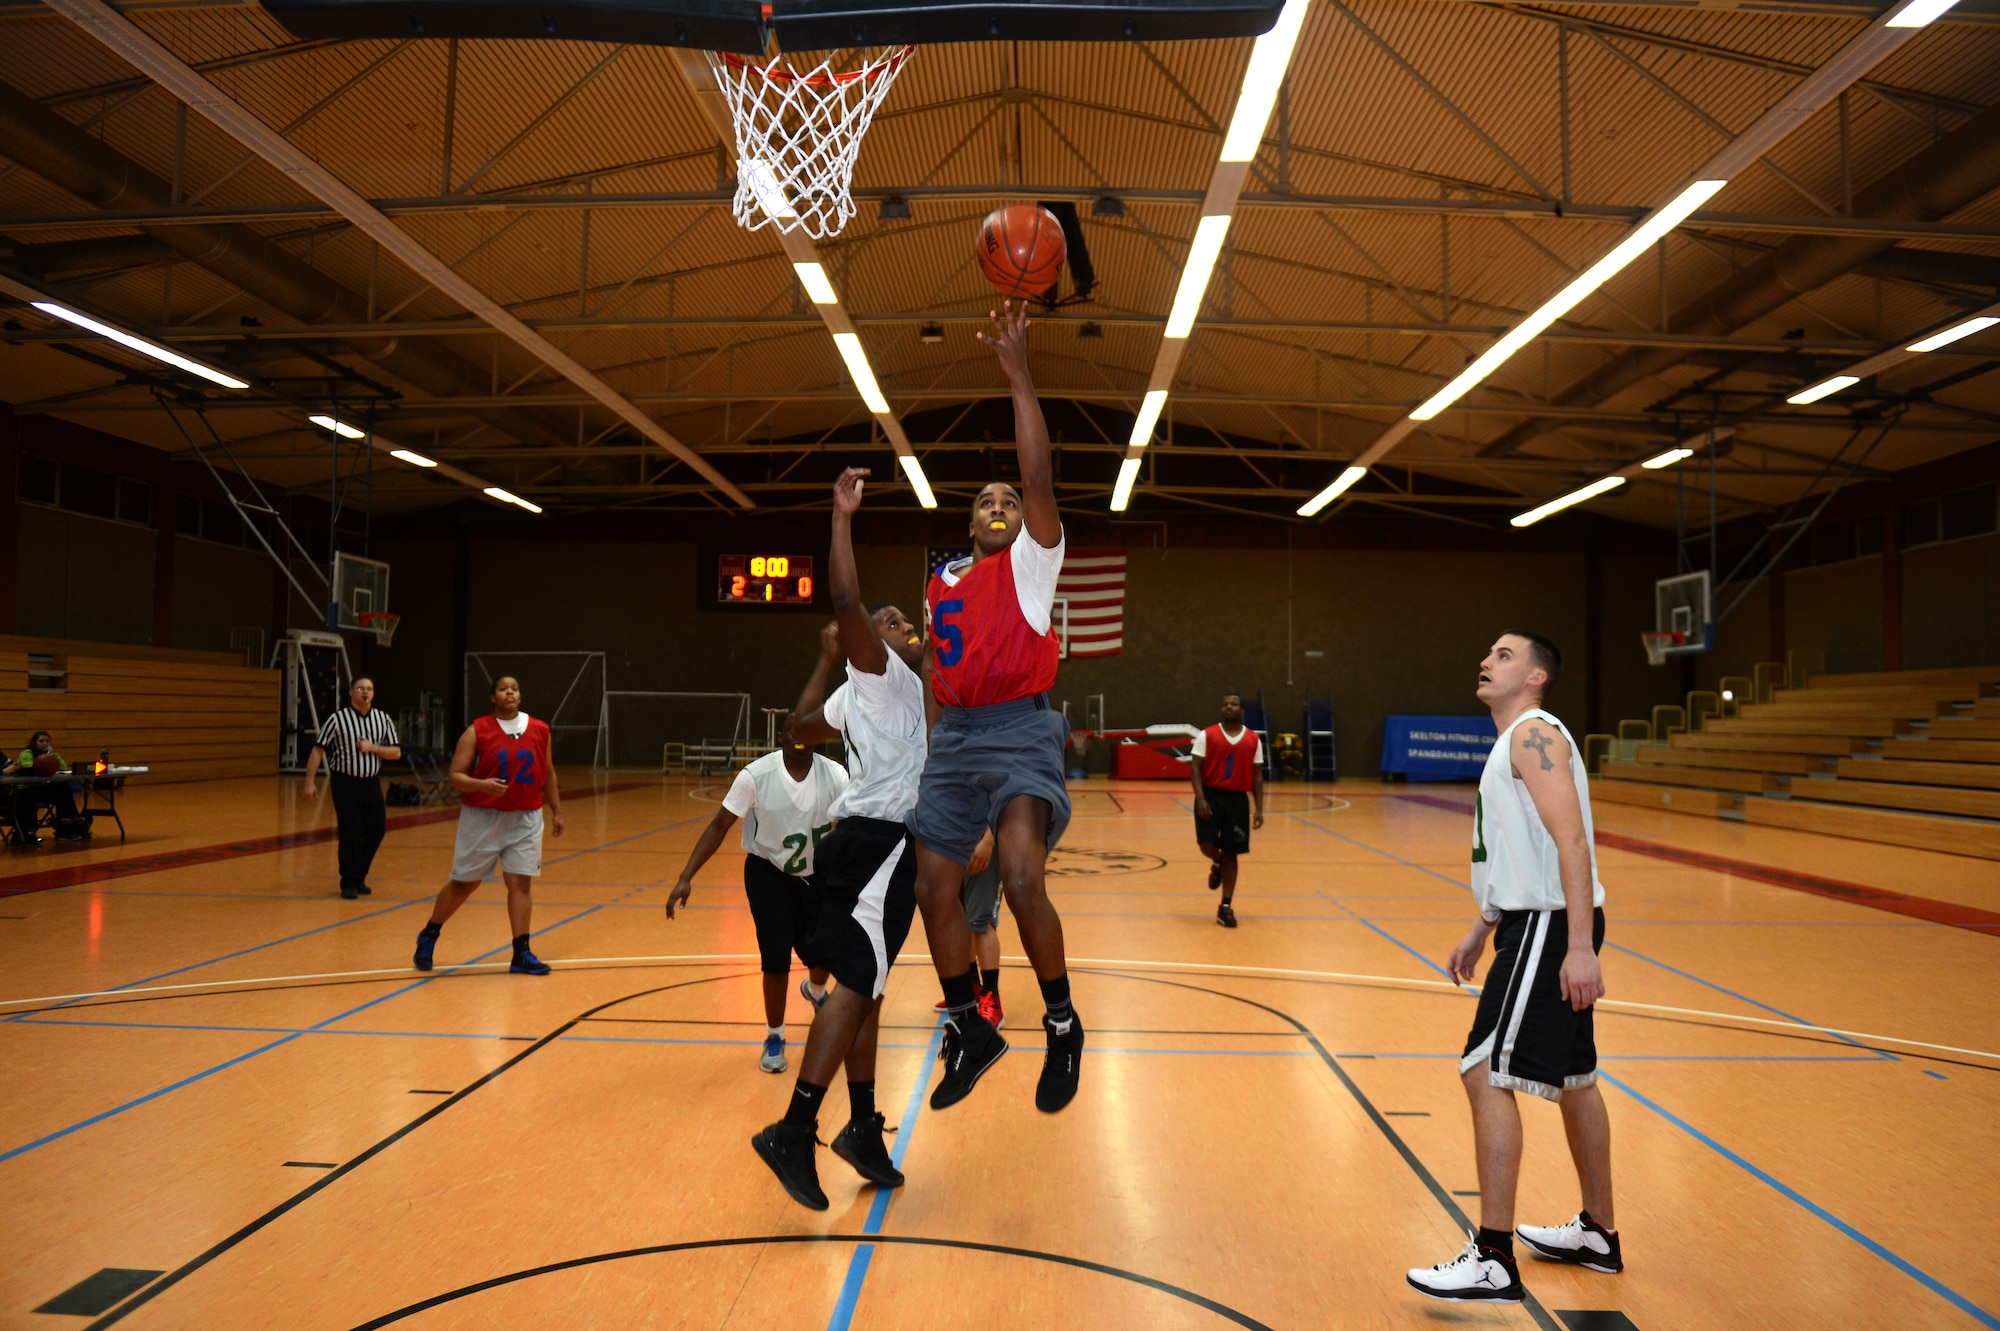 SPANGDAHLEM AIR BASE, Germany – Laron Mayfield, 52nd Communications Squadron, does a layup during a basketball game against the 52nd Civil Engineer Squadron inside the Skelton Memorial Fitness Center Jan. 8, 2013. The 52nd CS led the first half 19- 16. (U.S. Air Force photo by Airman 1st Class Gustavo Castillo/Released)